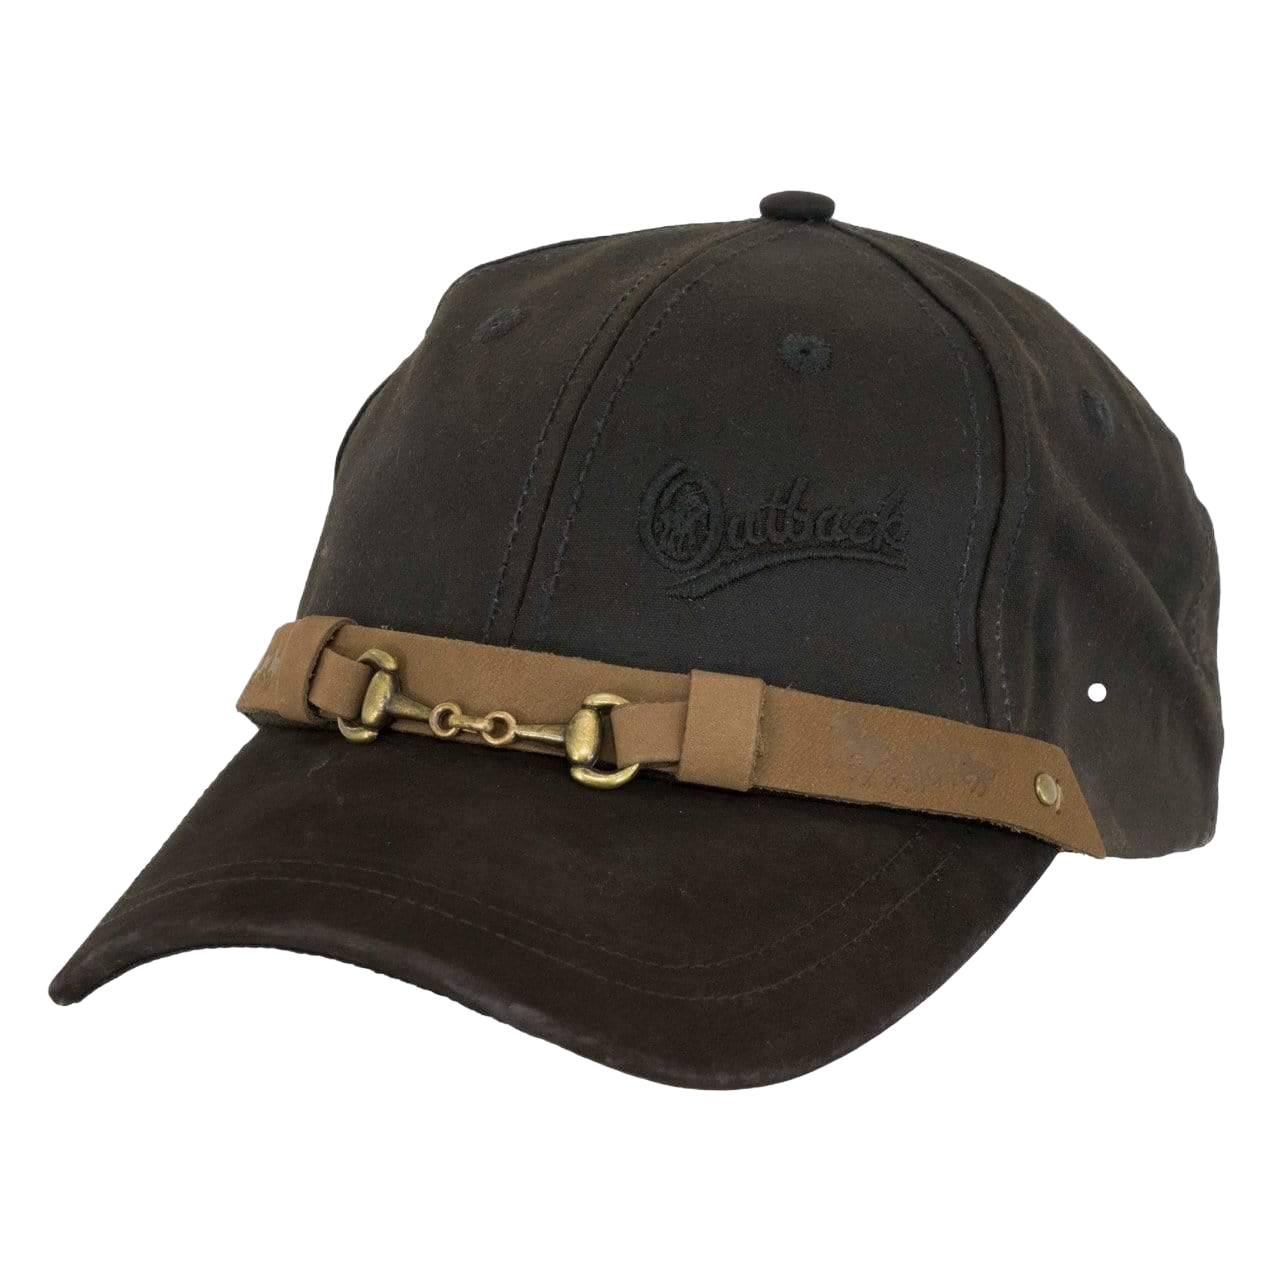 Outback Trading Company Unisex Brown Oilskin Equestrian Cap 1482-BRN